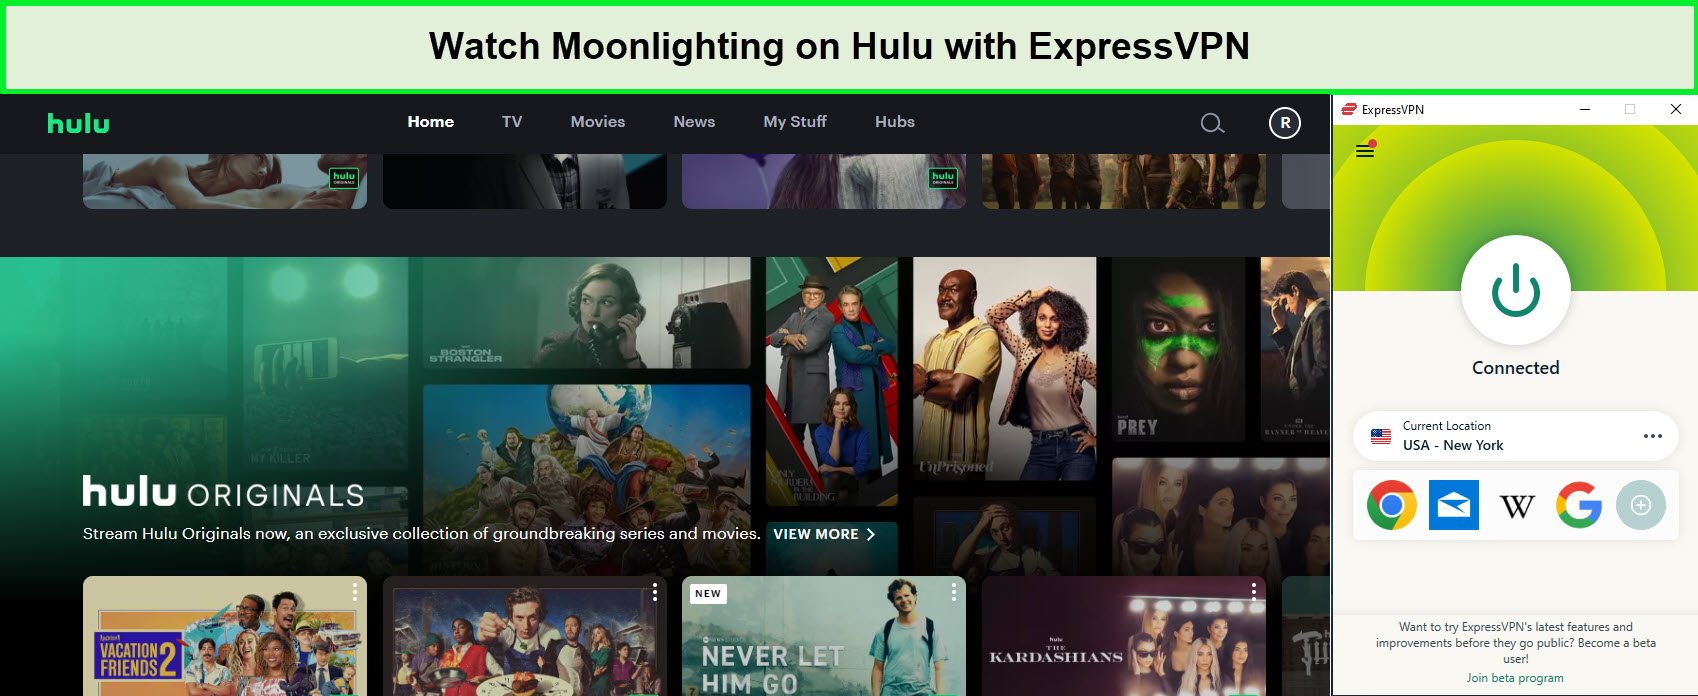 Watch-Moonlighting-in-Italy-on-Hulu-with-ExpressVPN